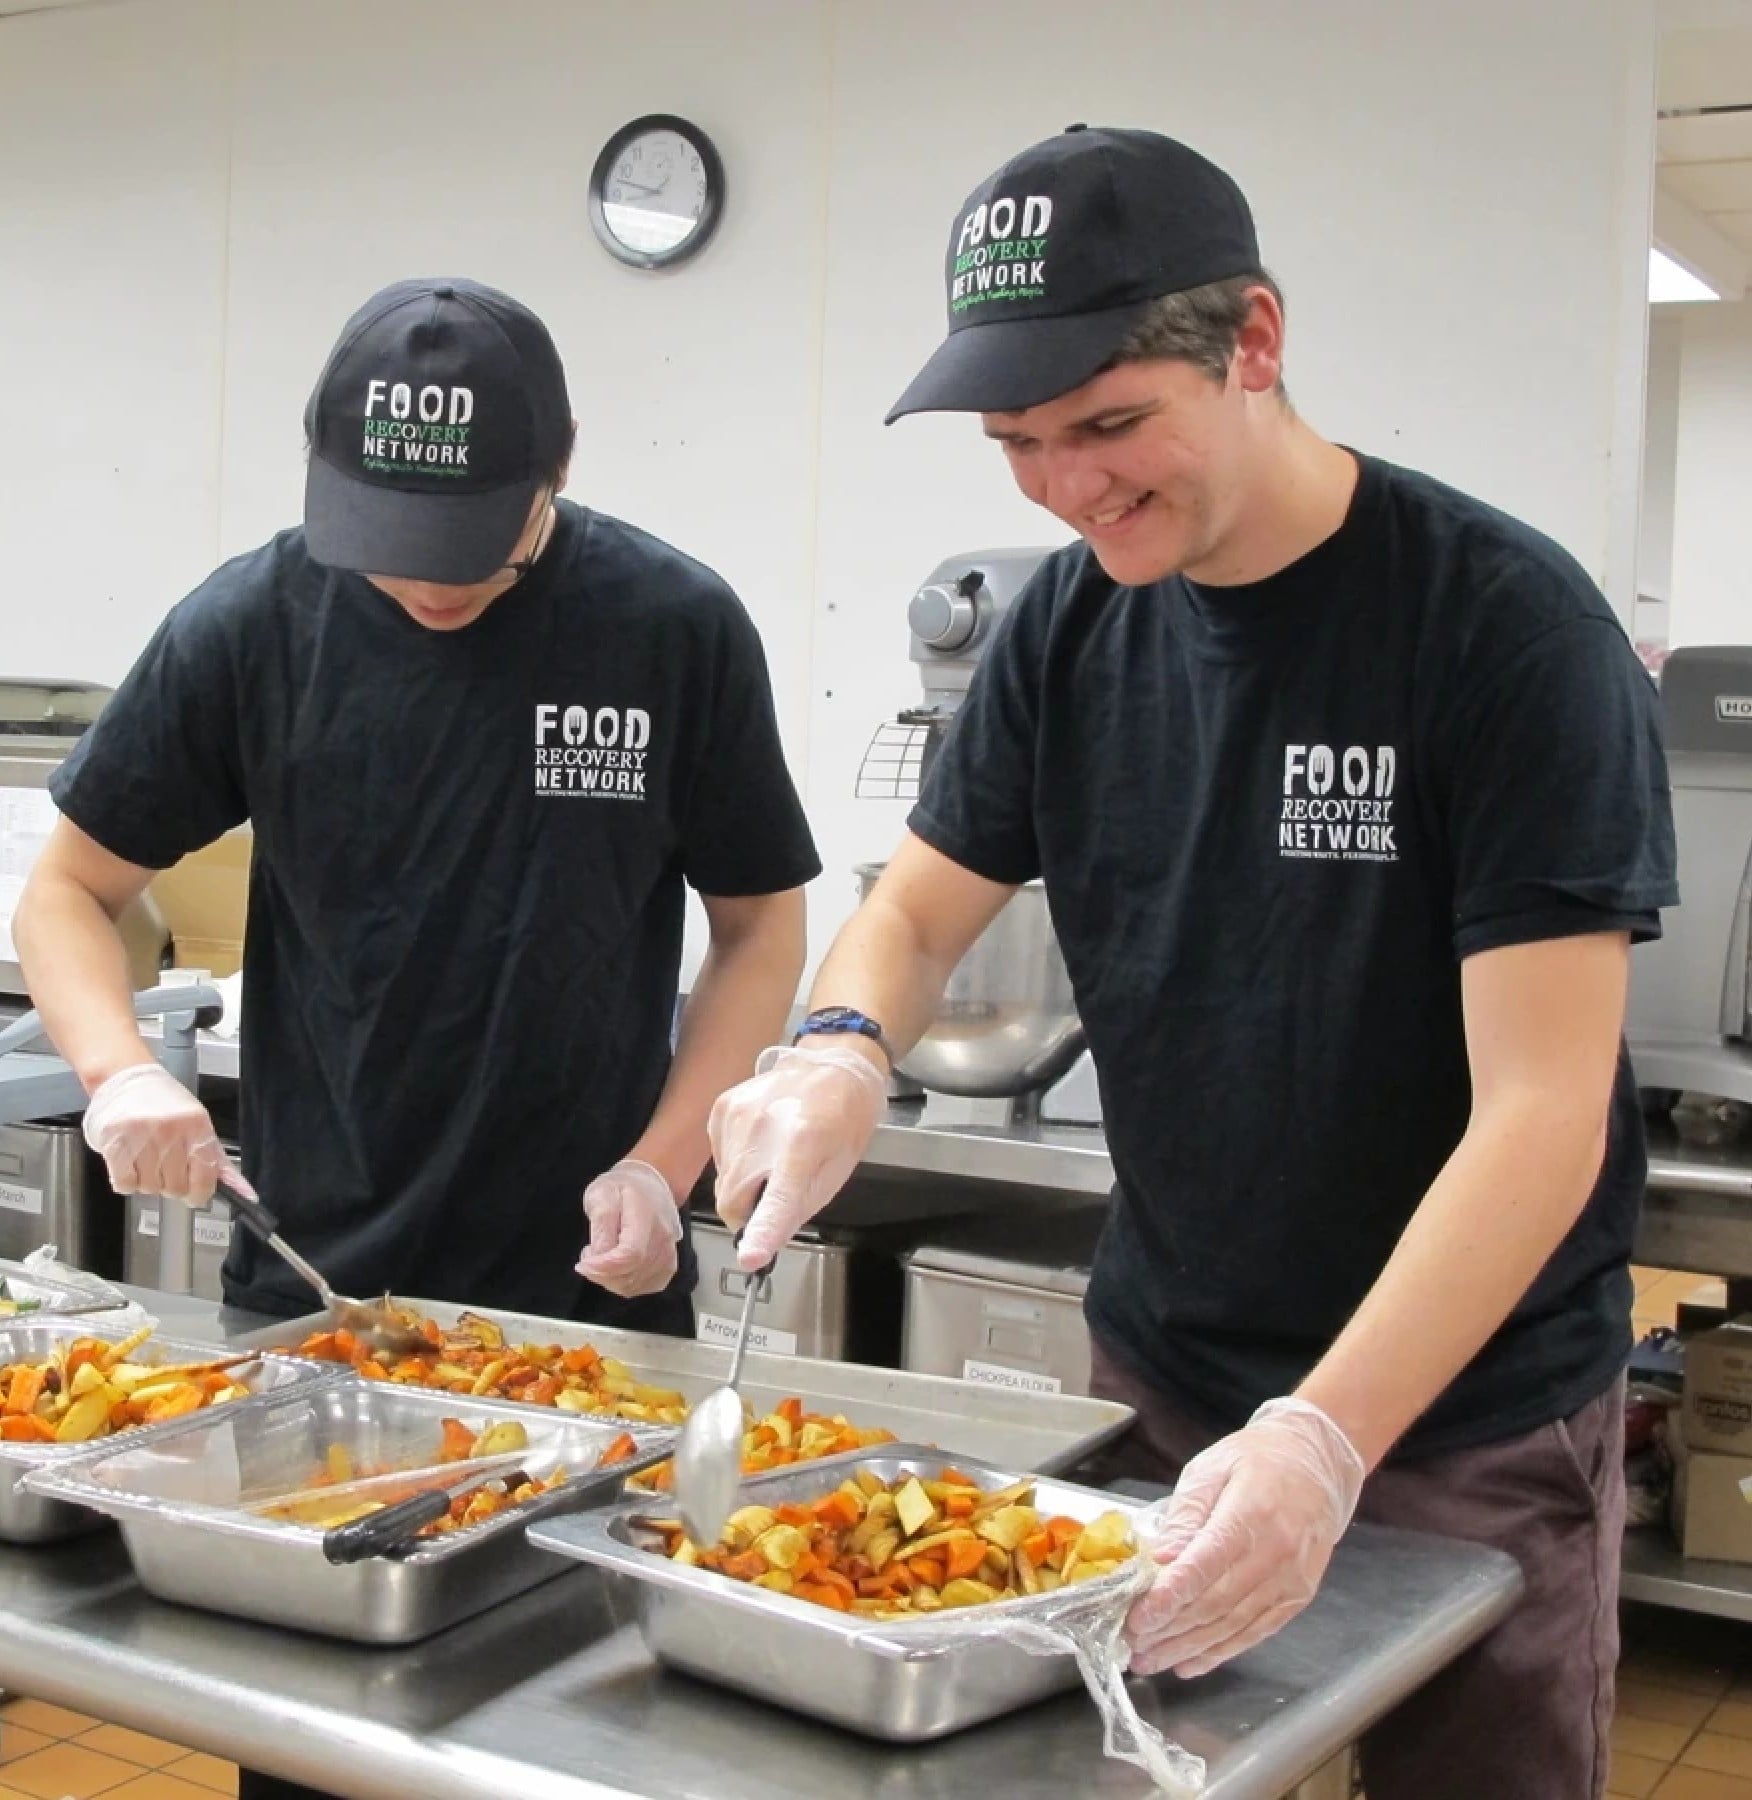 Food Recovery Network - Largest student-led movement fighting food waste and hunger in America